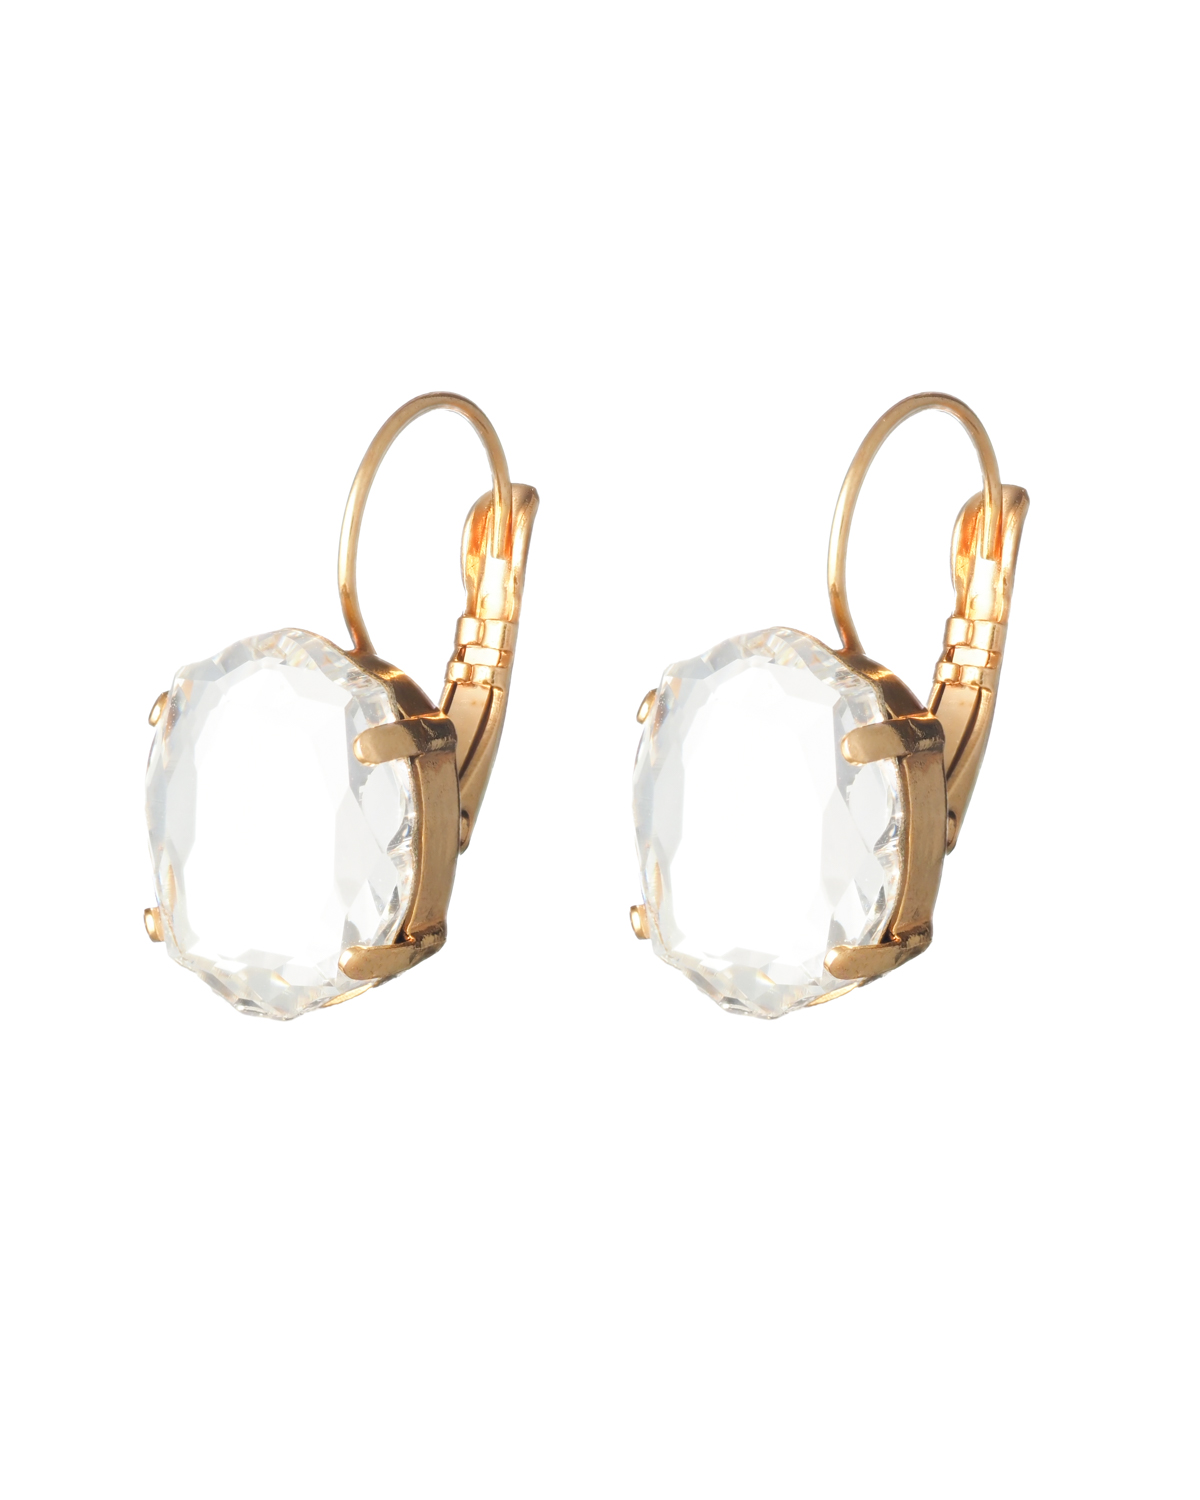 Crystal Baroque Mirror Earrings - Gold plated close